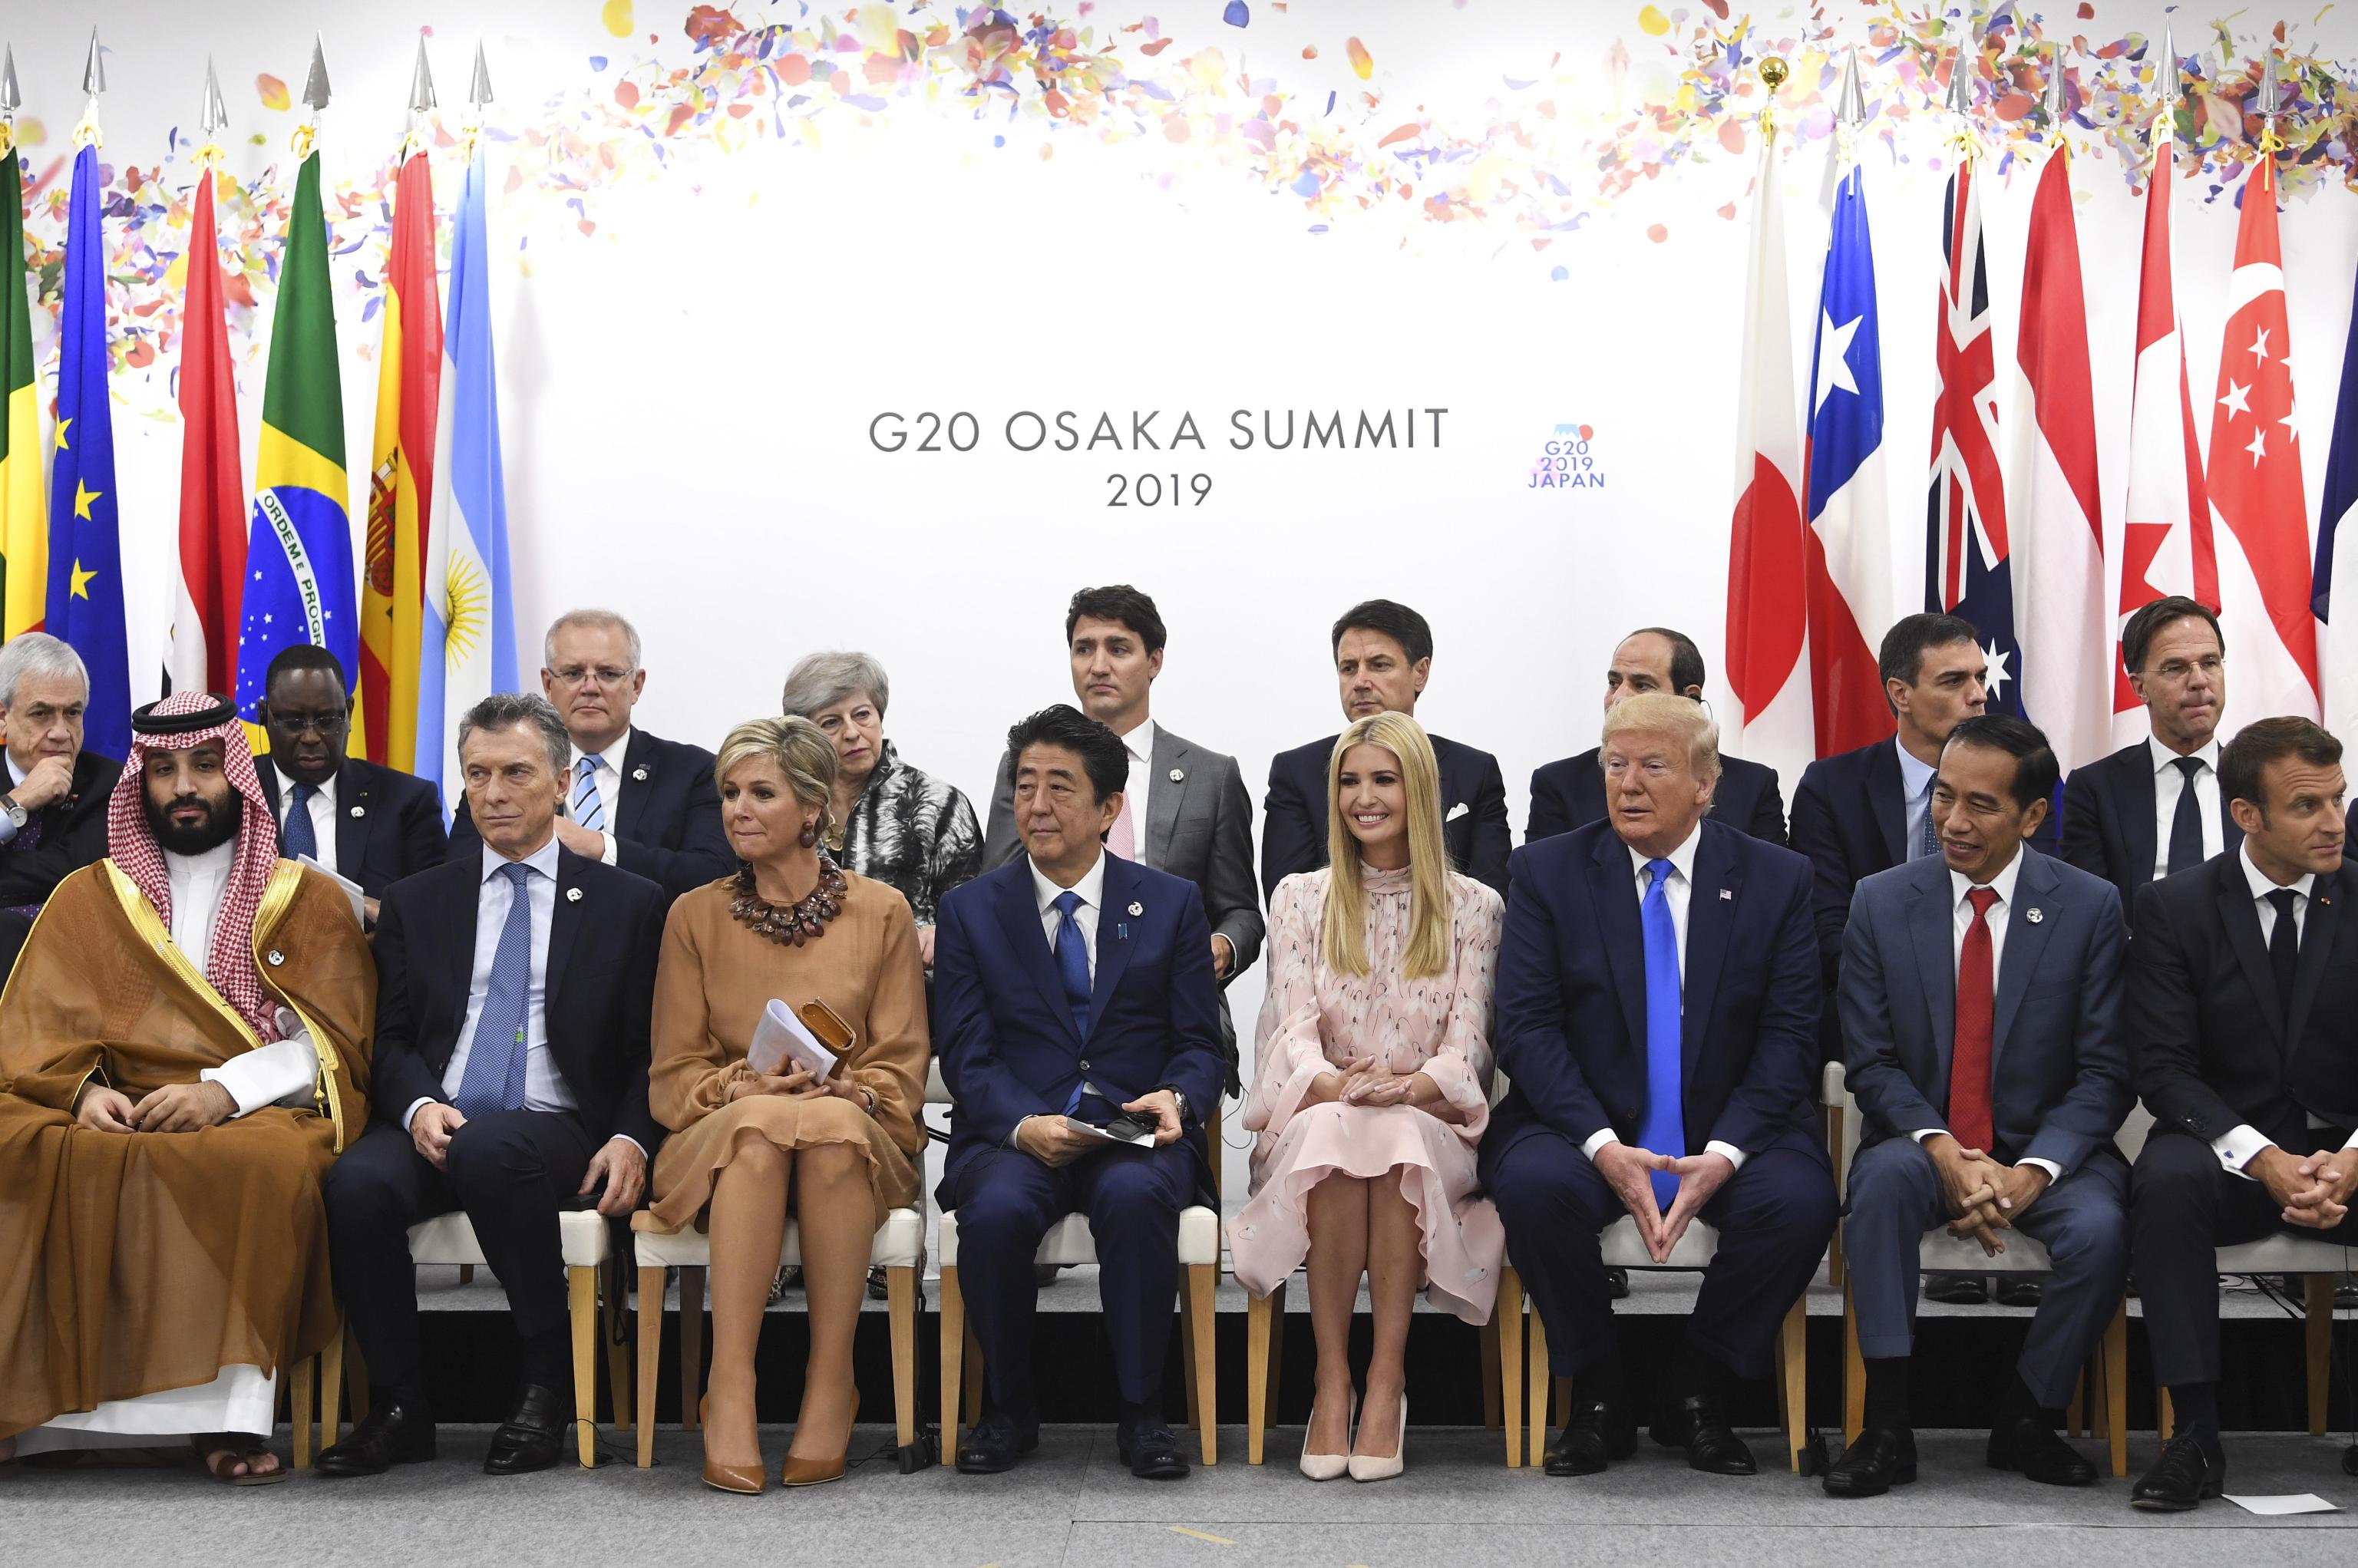 epa07681633 World Leaders pose for a family photo during the Leader's Special event on Women's Empowerment on the second day of the G20 summit in Osaka, Japan, 29 June 2019. It is the first time Japan will host a  summit. The summit gathers leaders from 19 countries and the European Union to discuss topics such as global economy, trade and investment, innovation and employment.  EPA/LUKAS COCH  AUSTRALIA AND NEW ZEALAND OUT